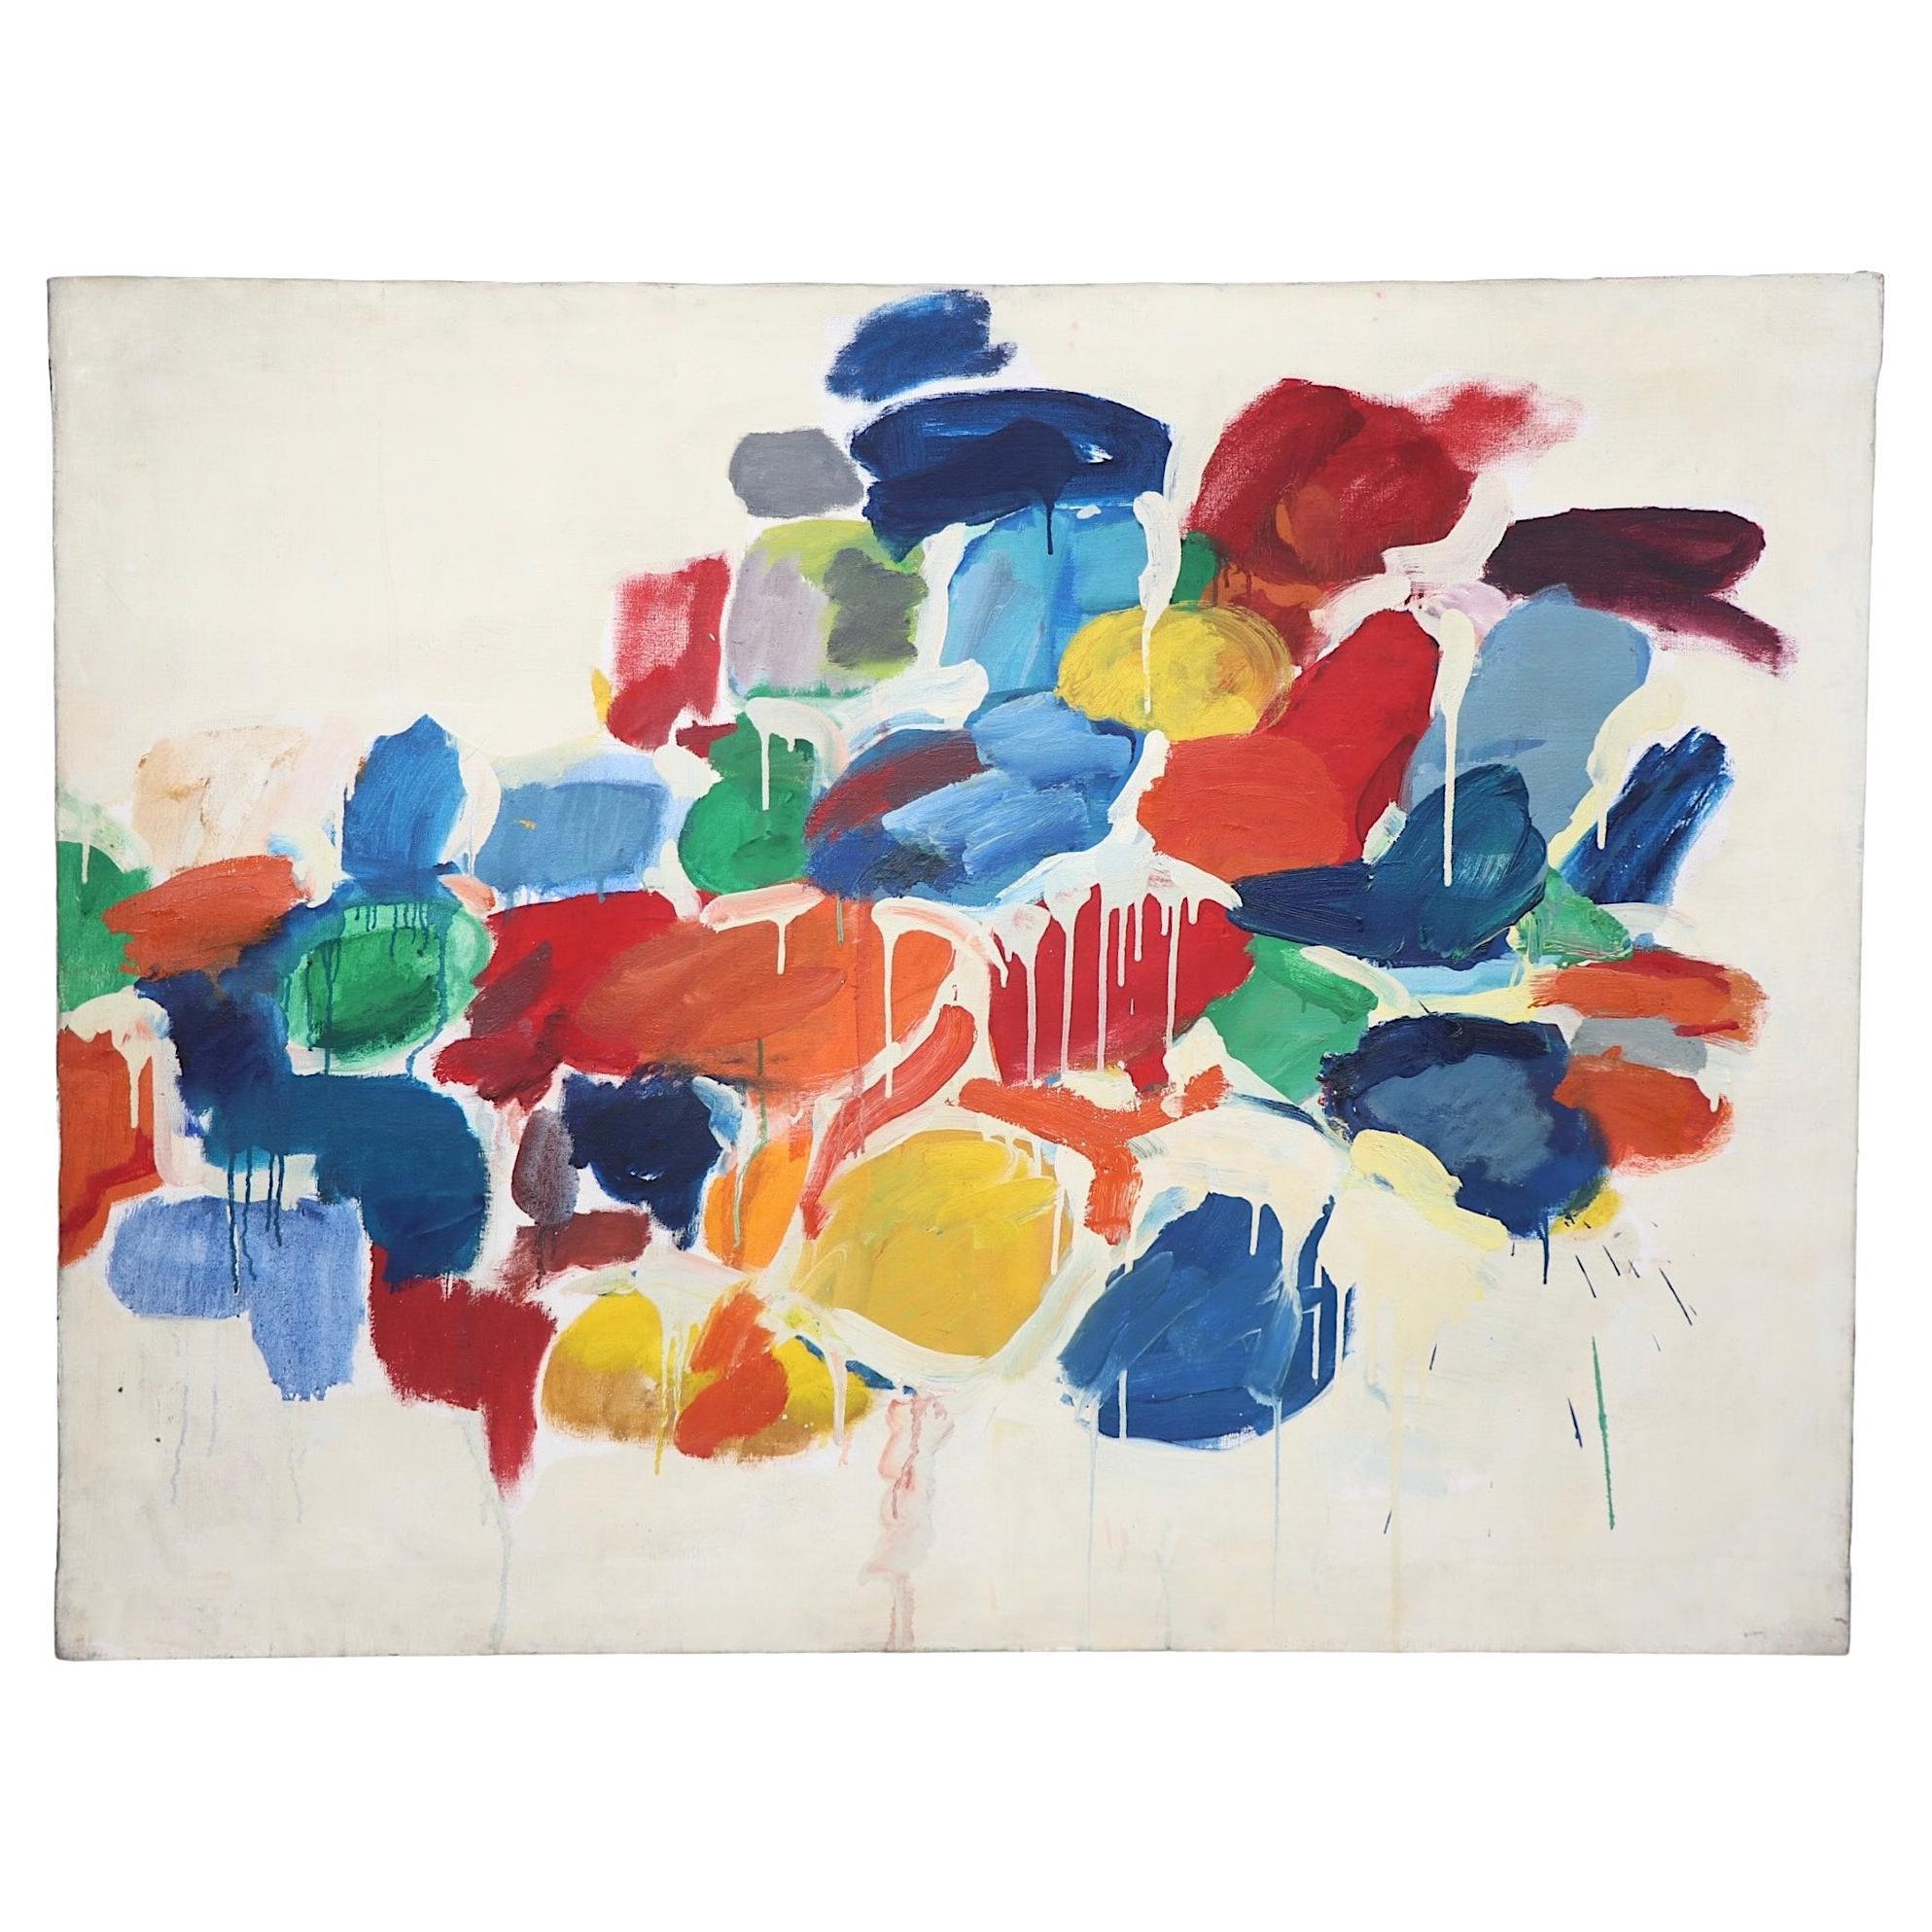 Large vintage abstract  acrylic on canvas  painting , by Jules Granowitter  c 1940/1950's.  Mr. Granowitter was an accomplished painter, and illustrator, a Brooklyn native and  graduated from noted NYC art school, Cooper Union. Unfortunately, there